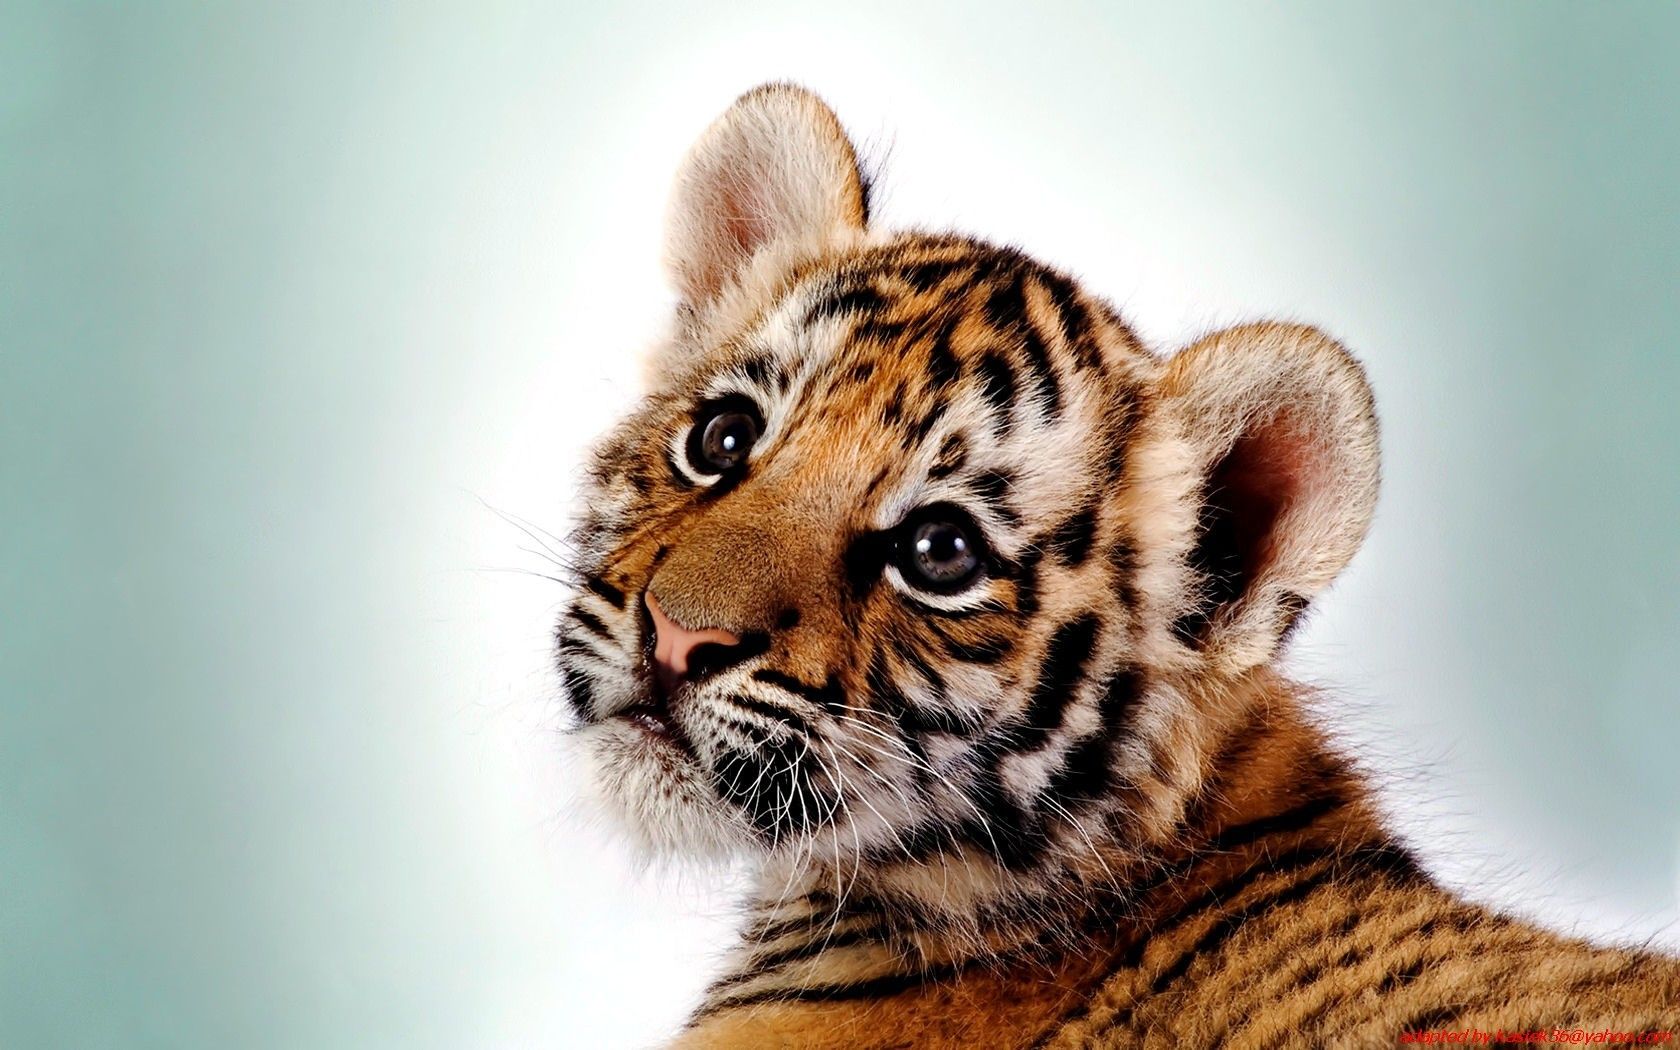 Cute Baby Tiger Wallpaper Images | wallpaperwide